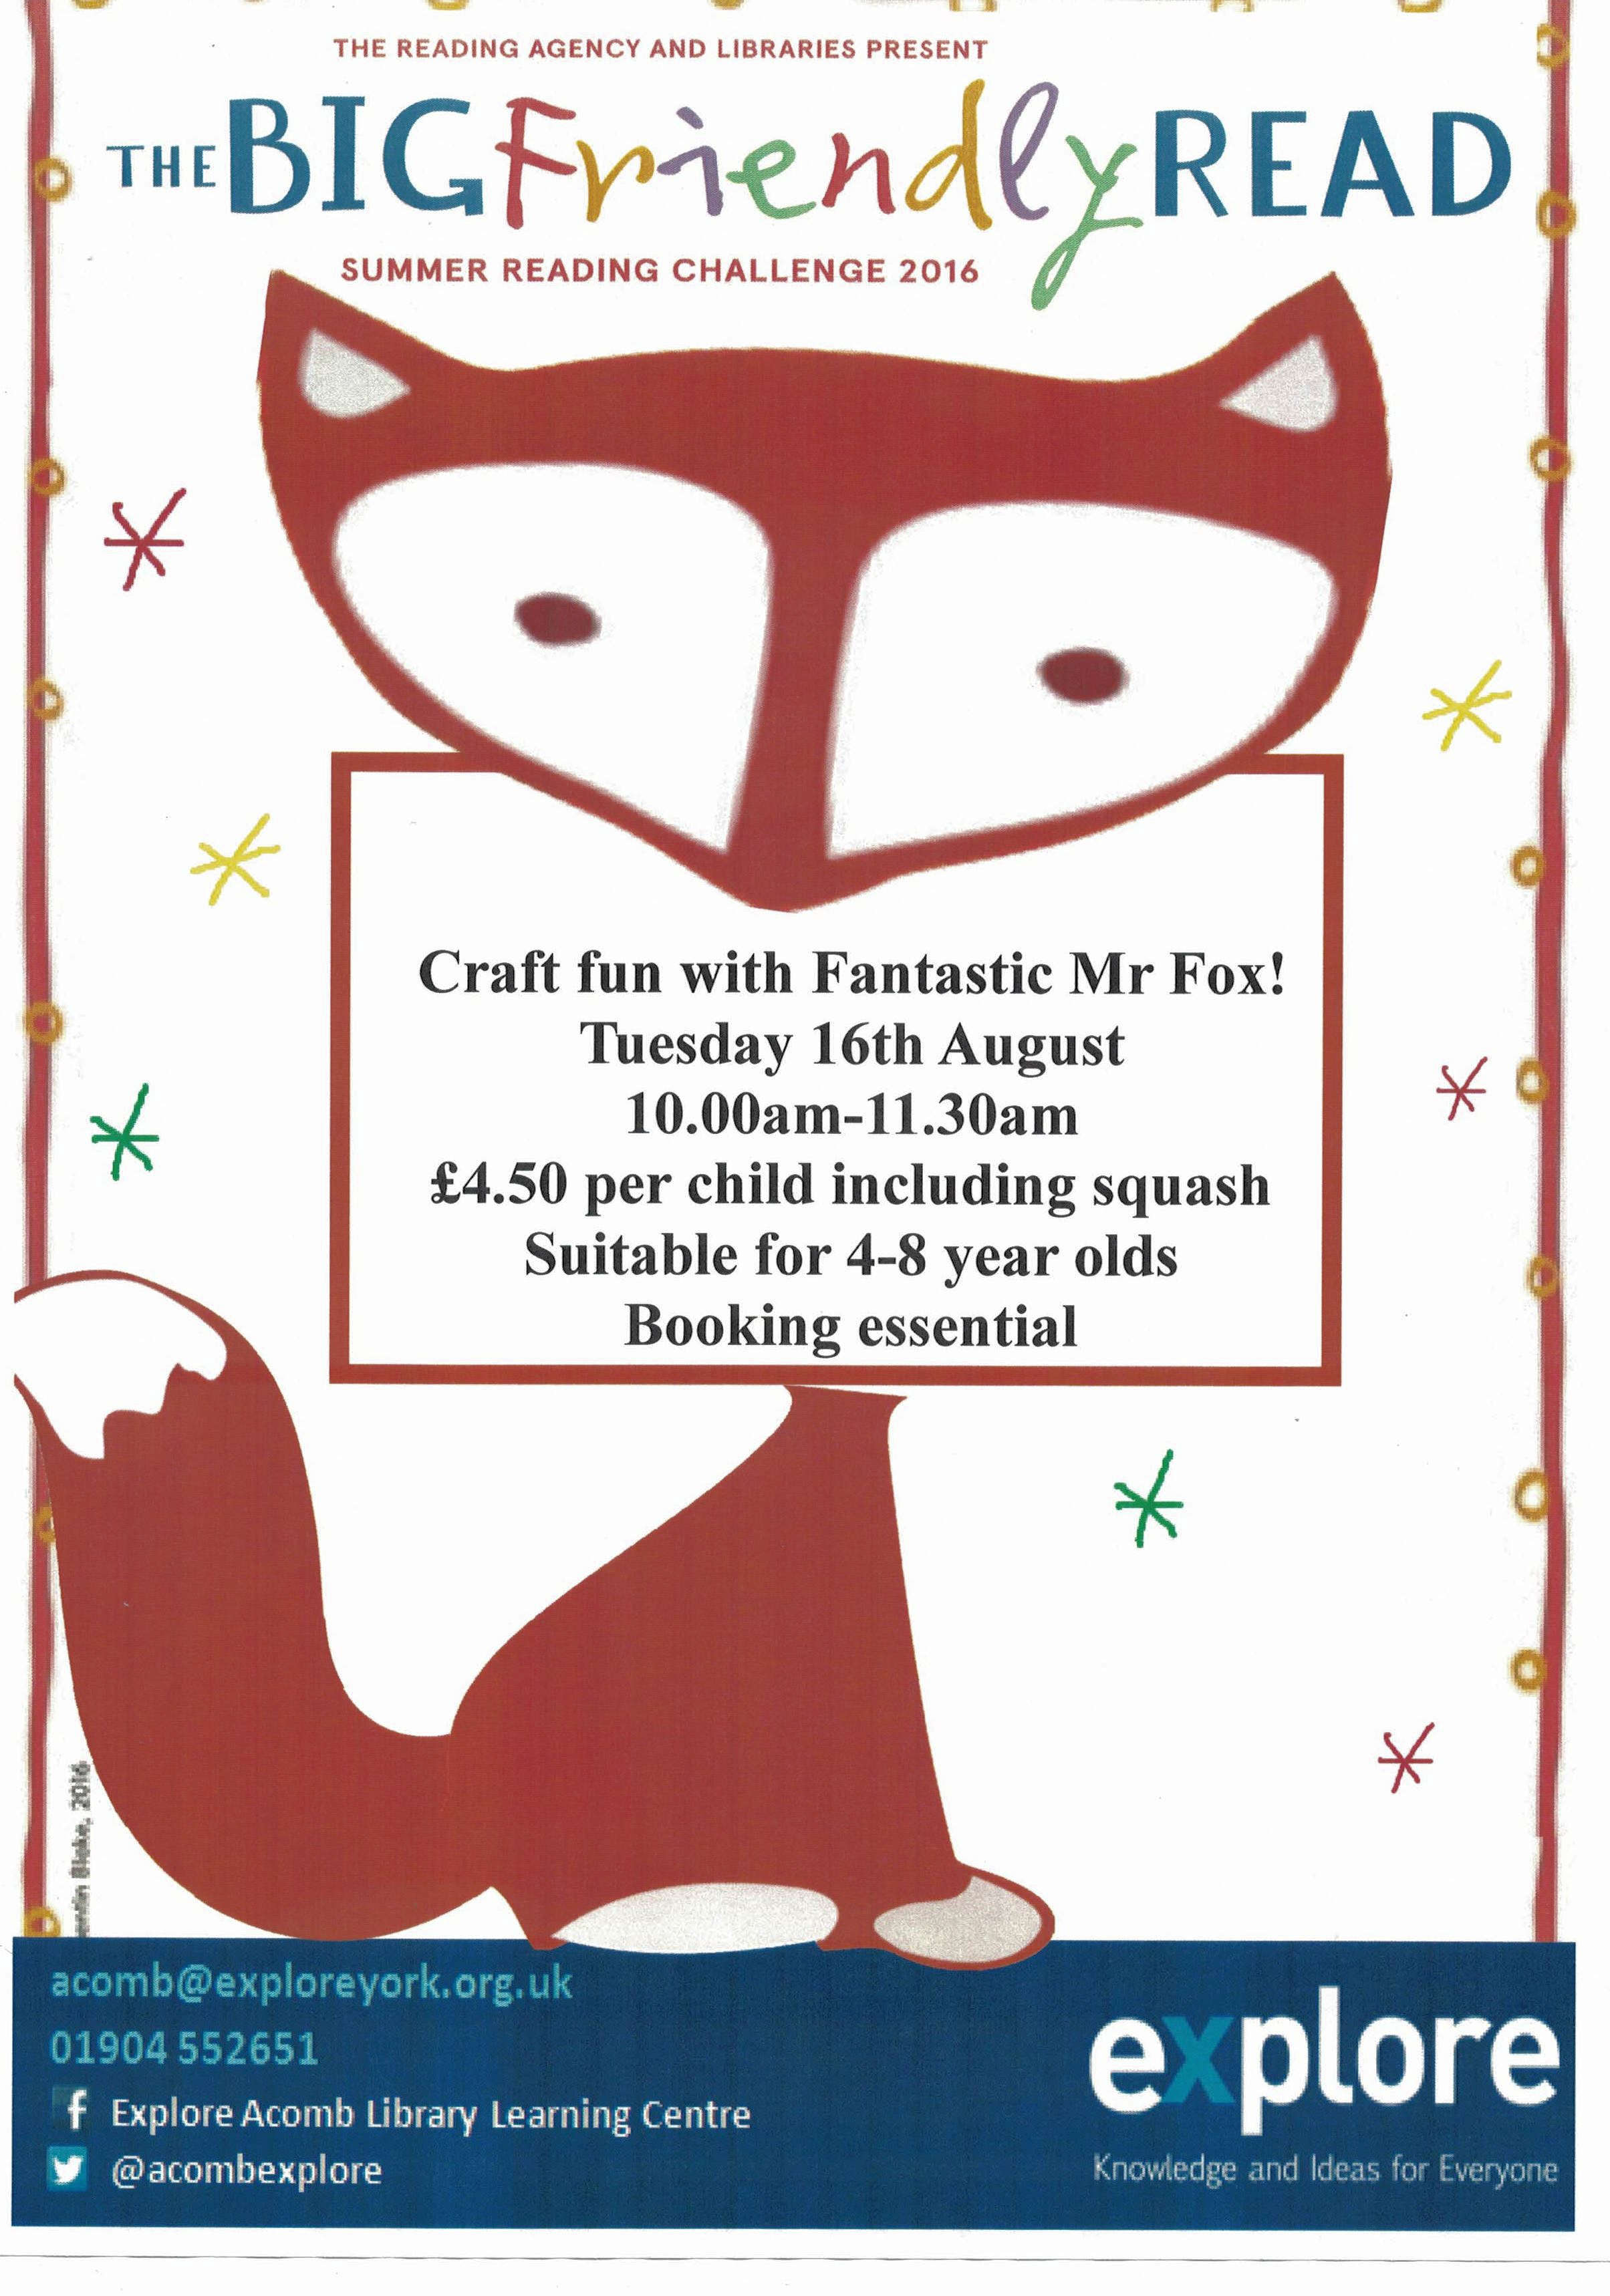 Acomb Libary Craft fund with Mr Fox 16th Aug 2016